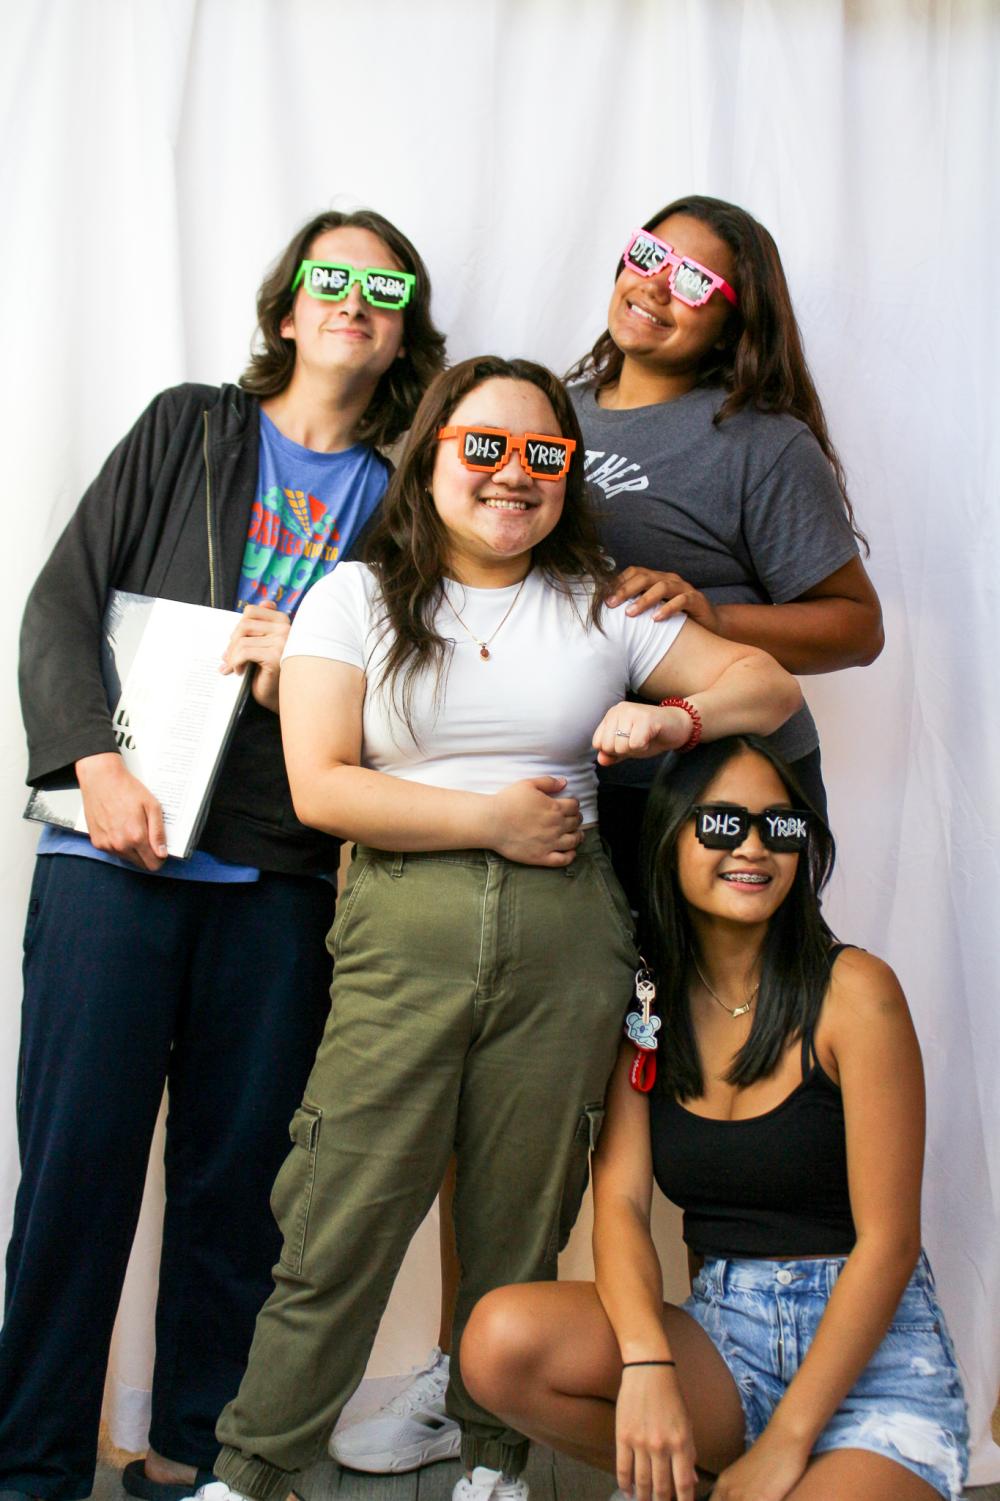 PantherPawlooza%3A+Yearbook+Photo+Booth+Photos+%28Photos+by+Sophia+Edmonson%29